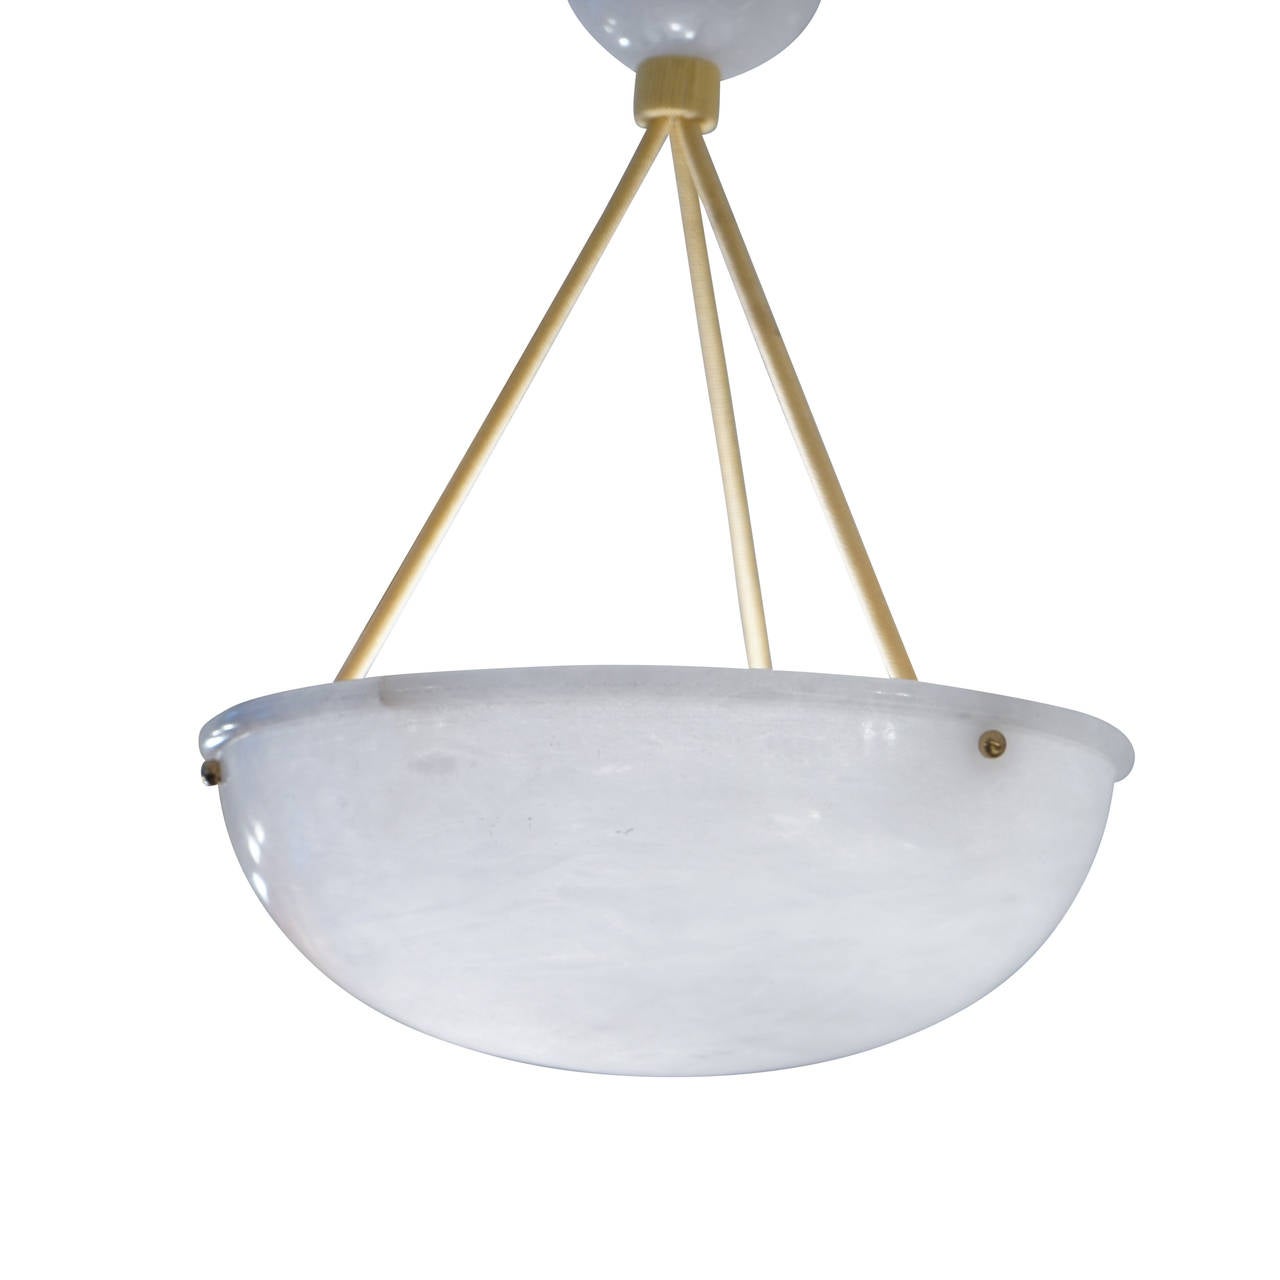 A Classic design, this single rimmed alabaster bowl is completely vein free and rewired to hold three 25 watt bulbs or any wattage LED bulbs. Adjustment to a custom overall drop included in the price. Roping color choices also available.

Custom